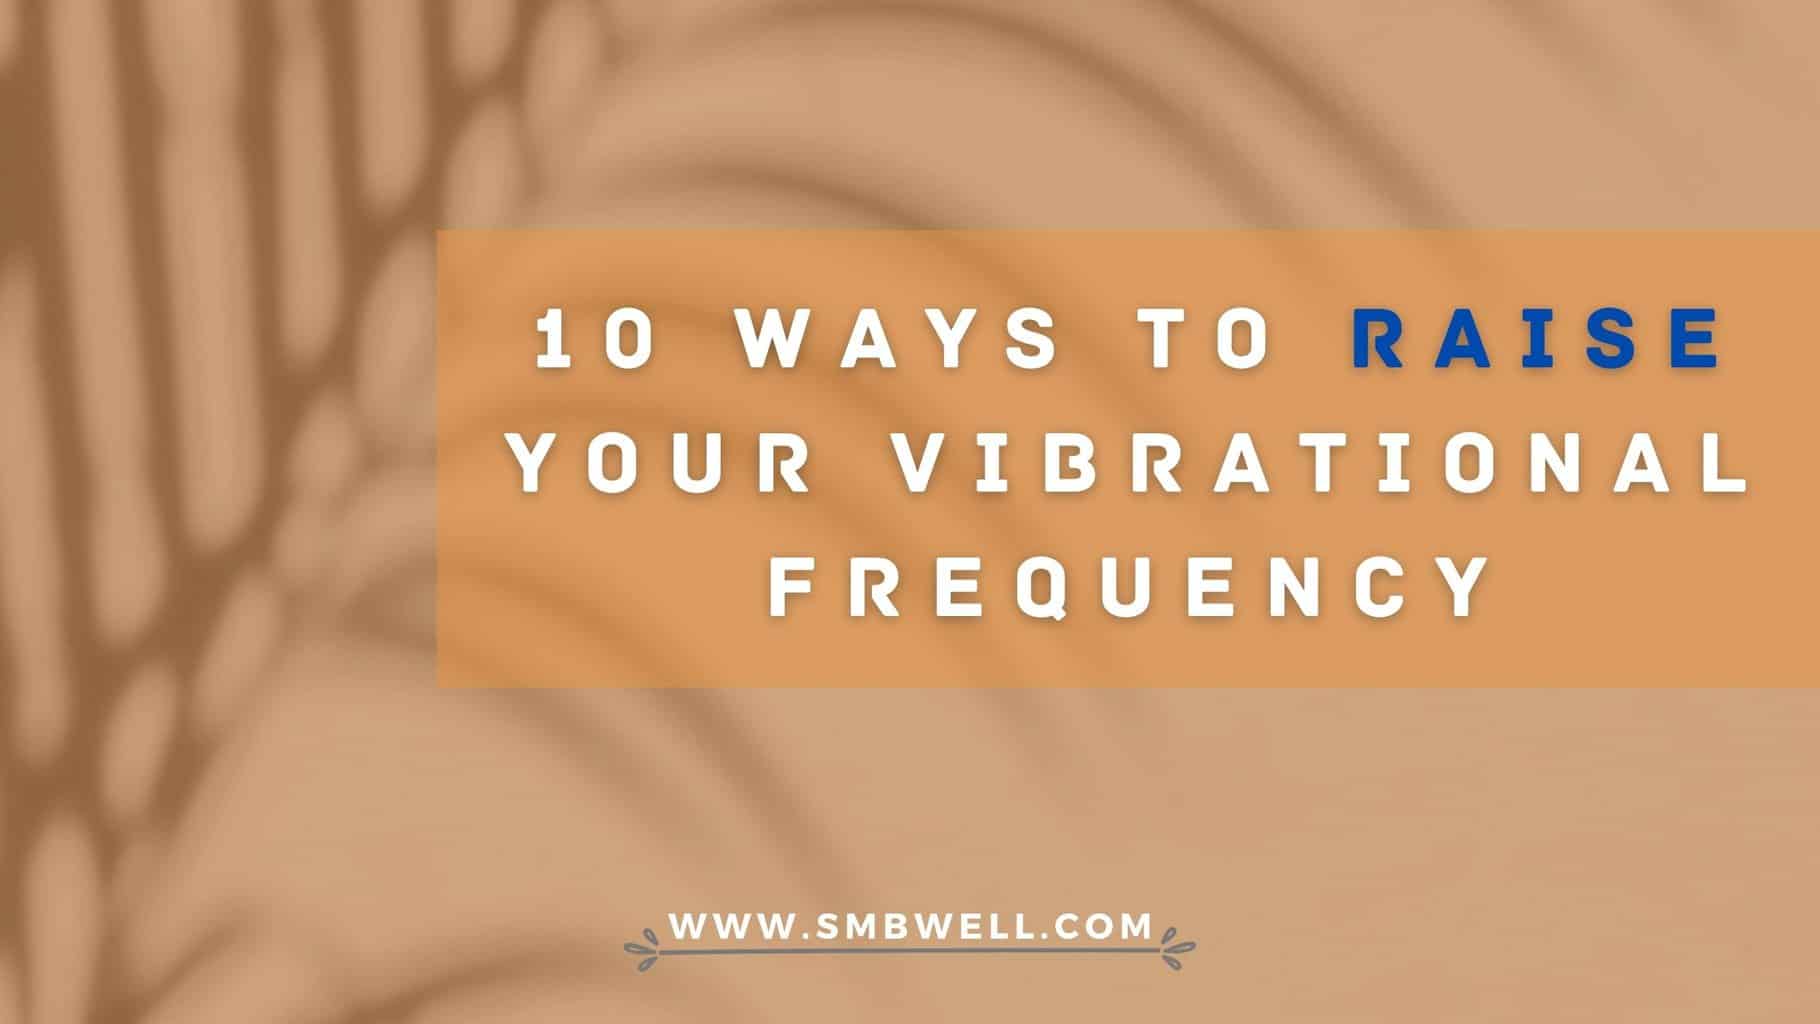 vibrational frequency